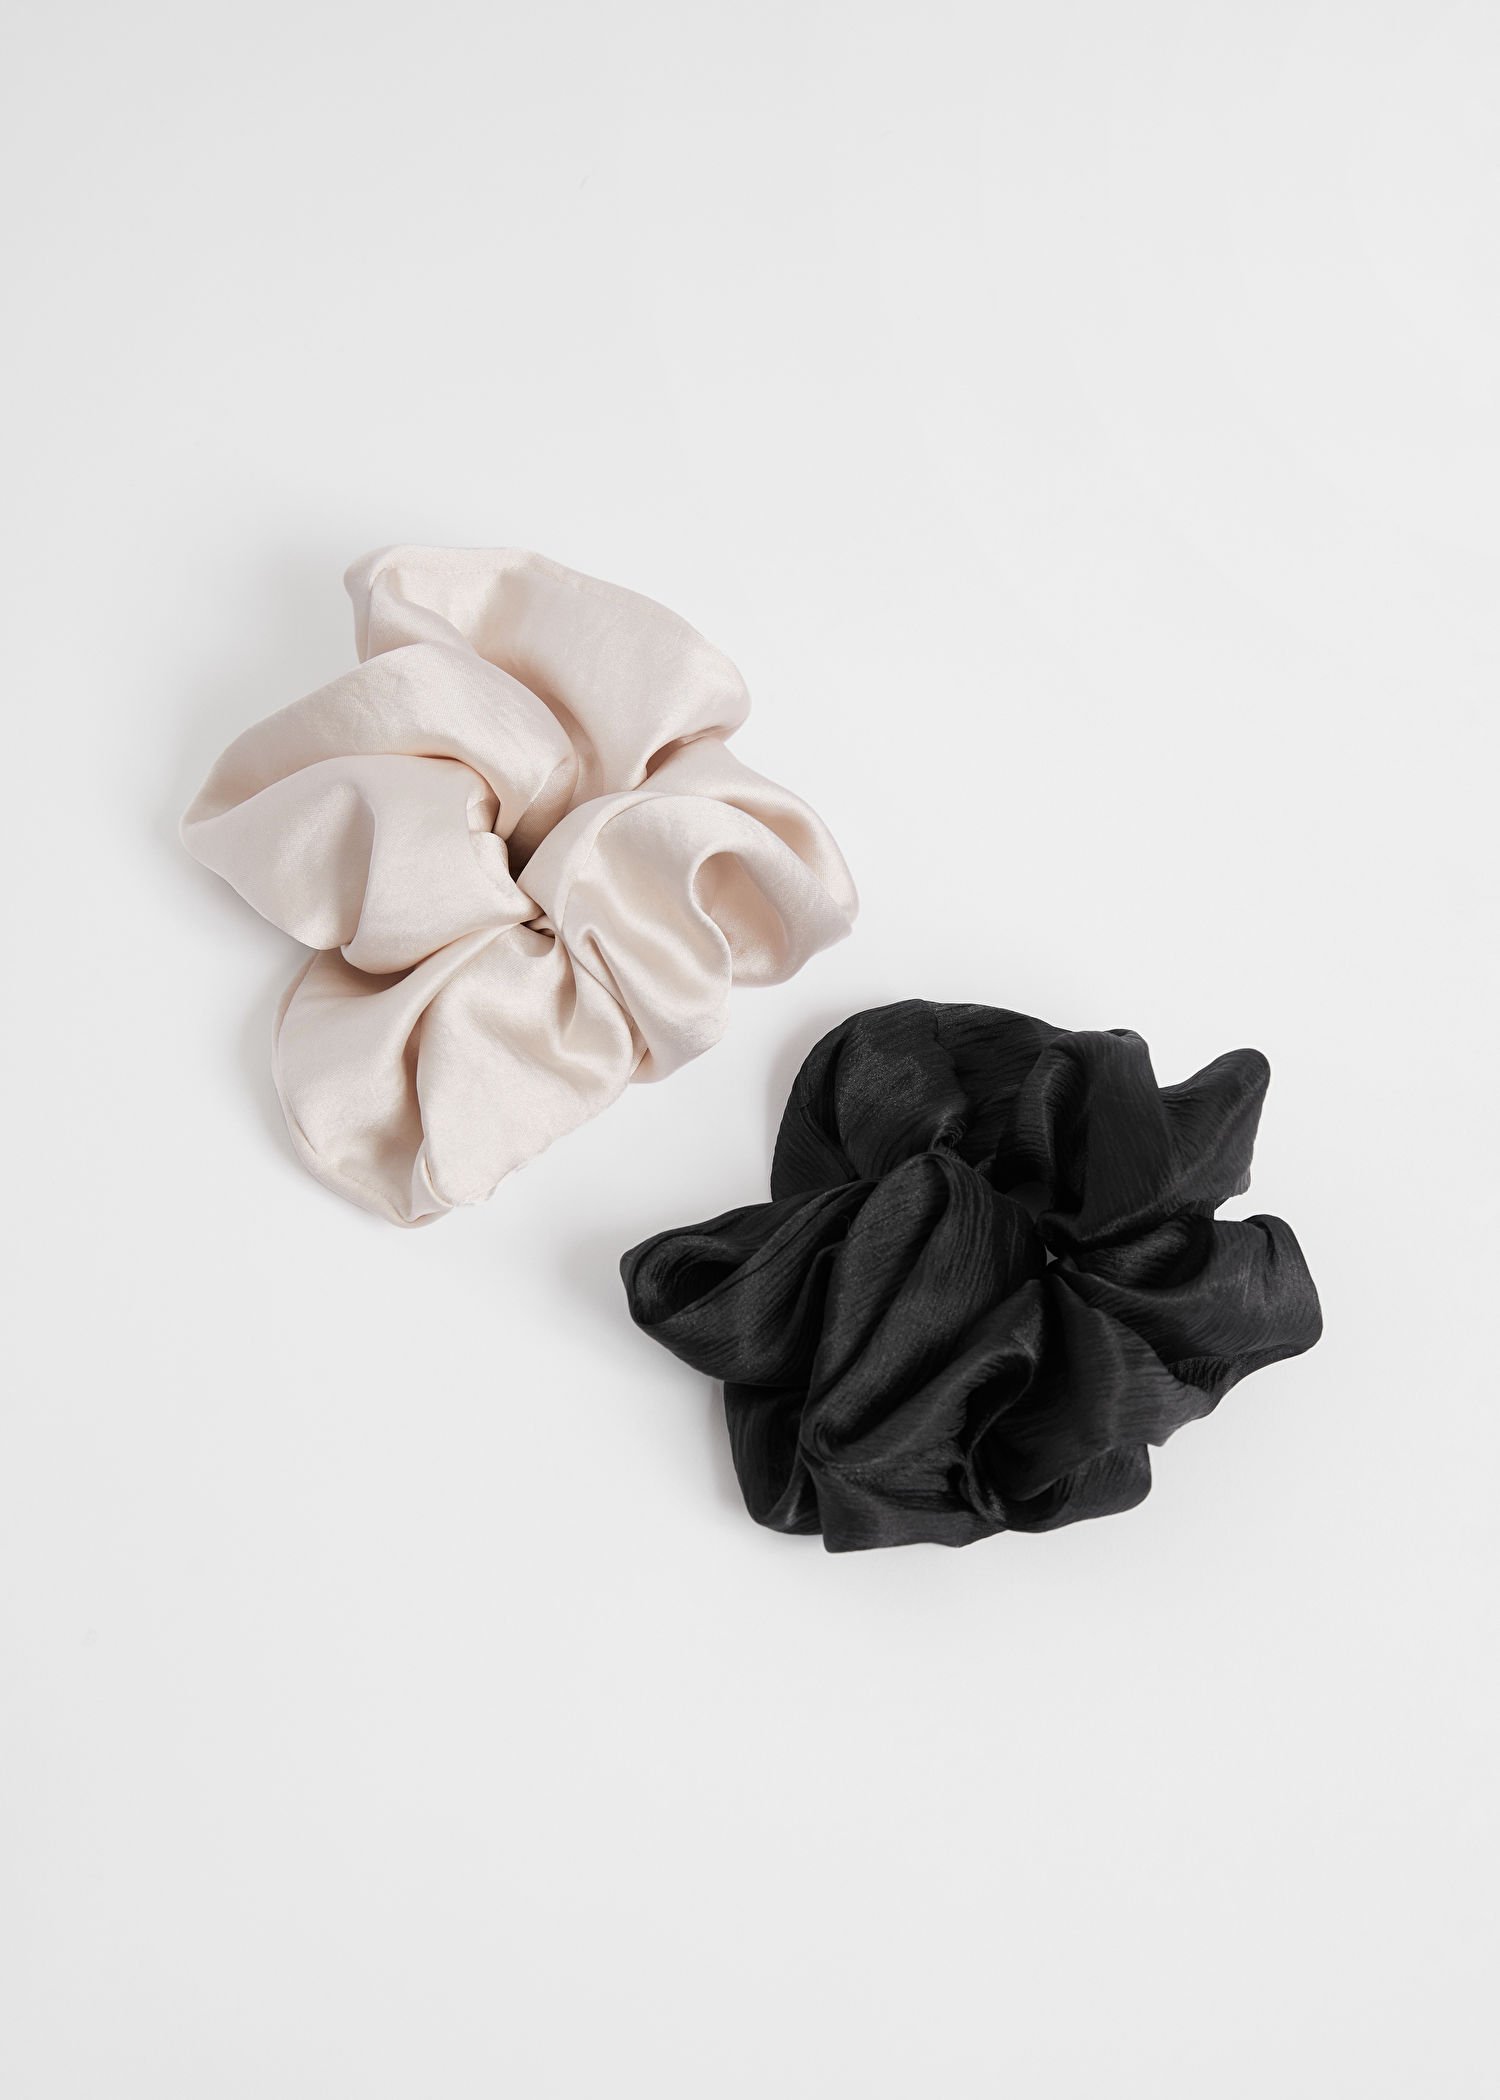 Endource | OTHER in & STORIES Set Satin Finish Cream/Black Scrunchie Duo Extra-Large